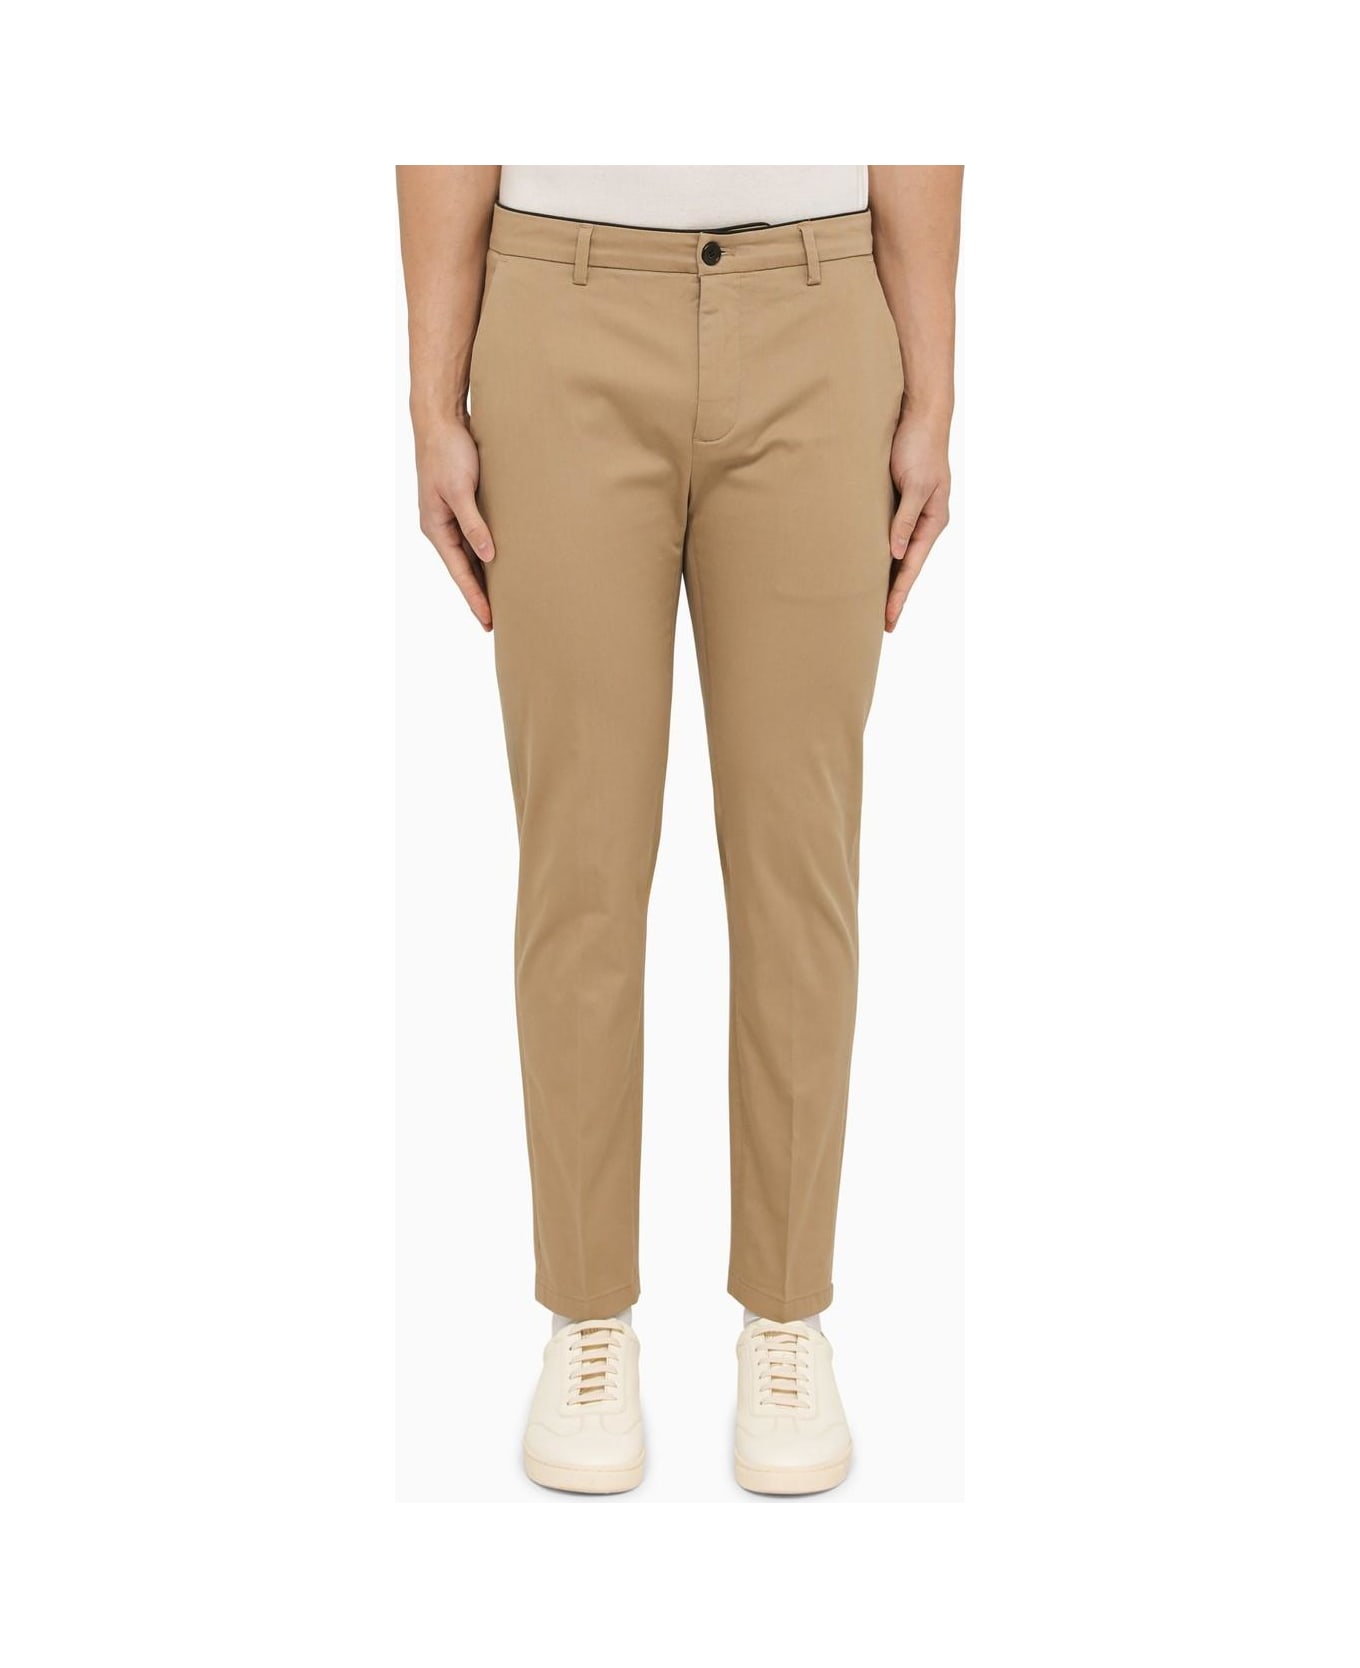 Department Five Regular Beige Cotton Trousers ボトムス